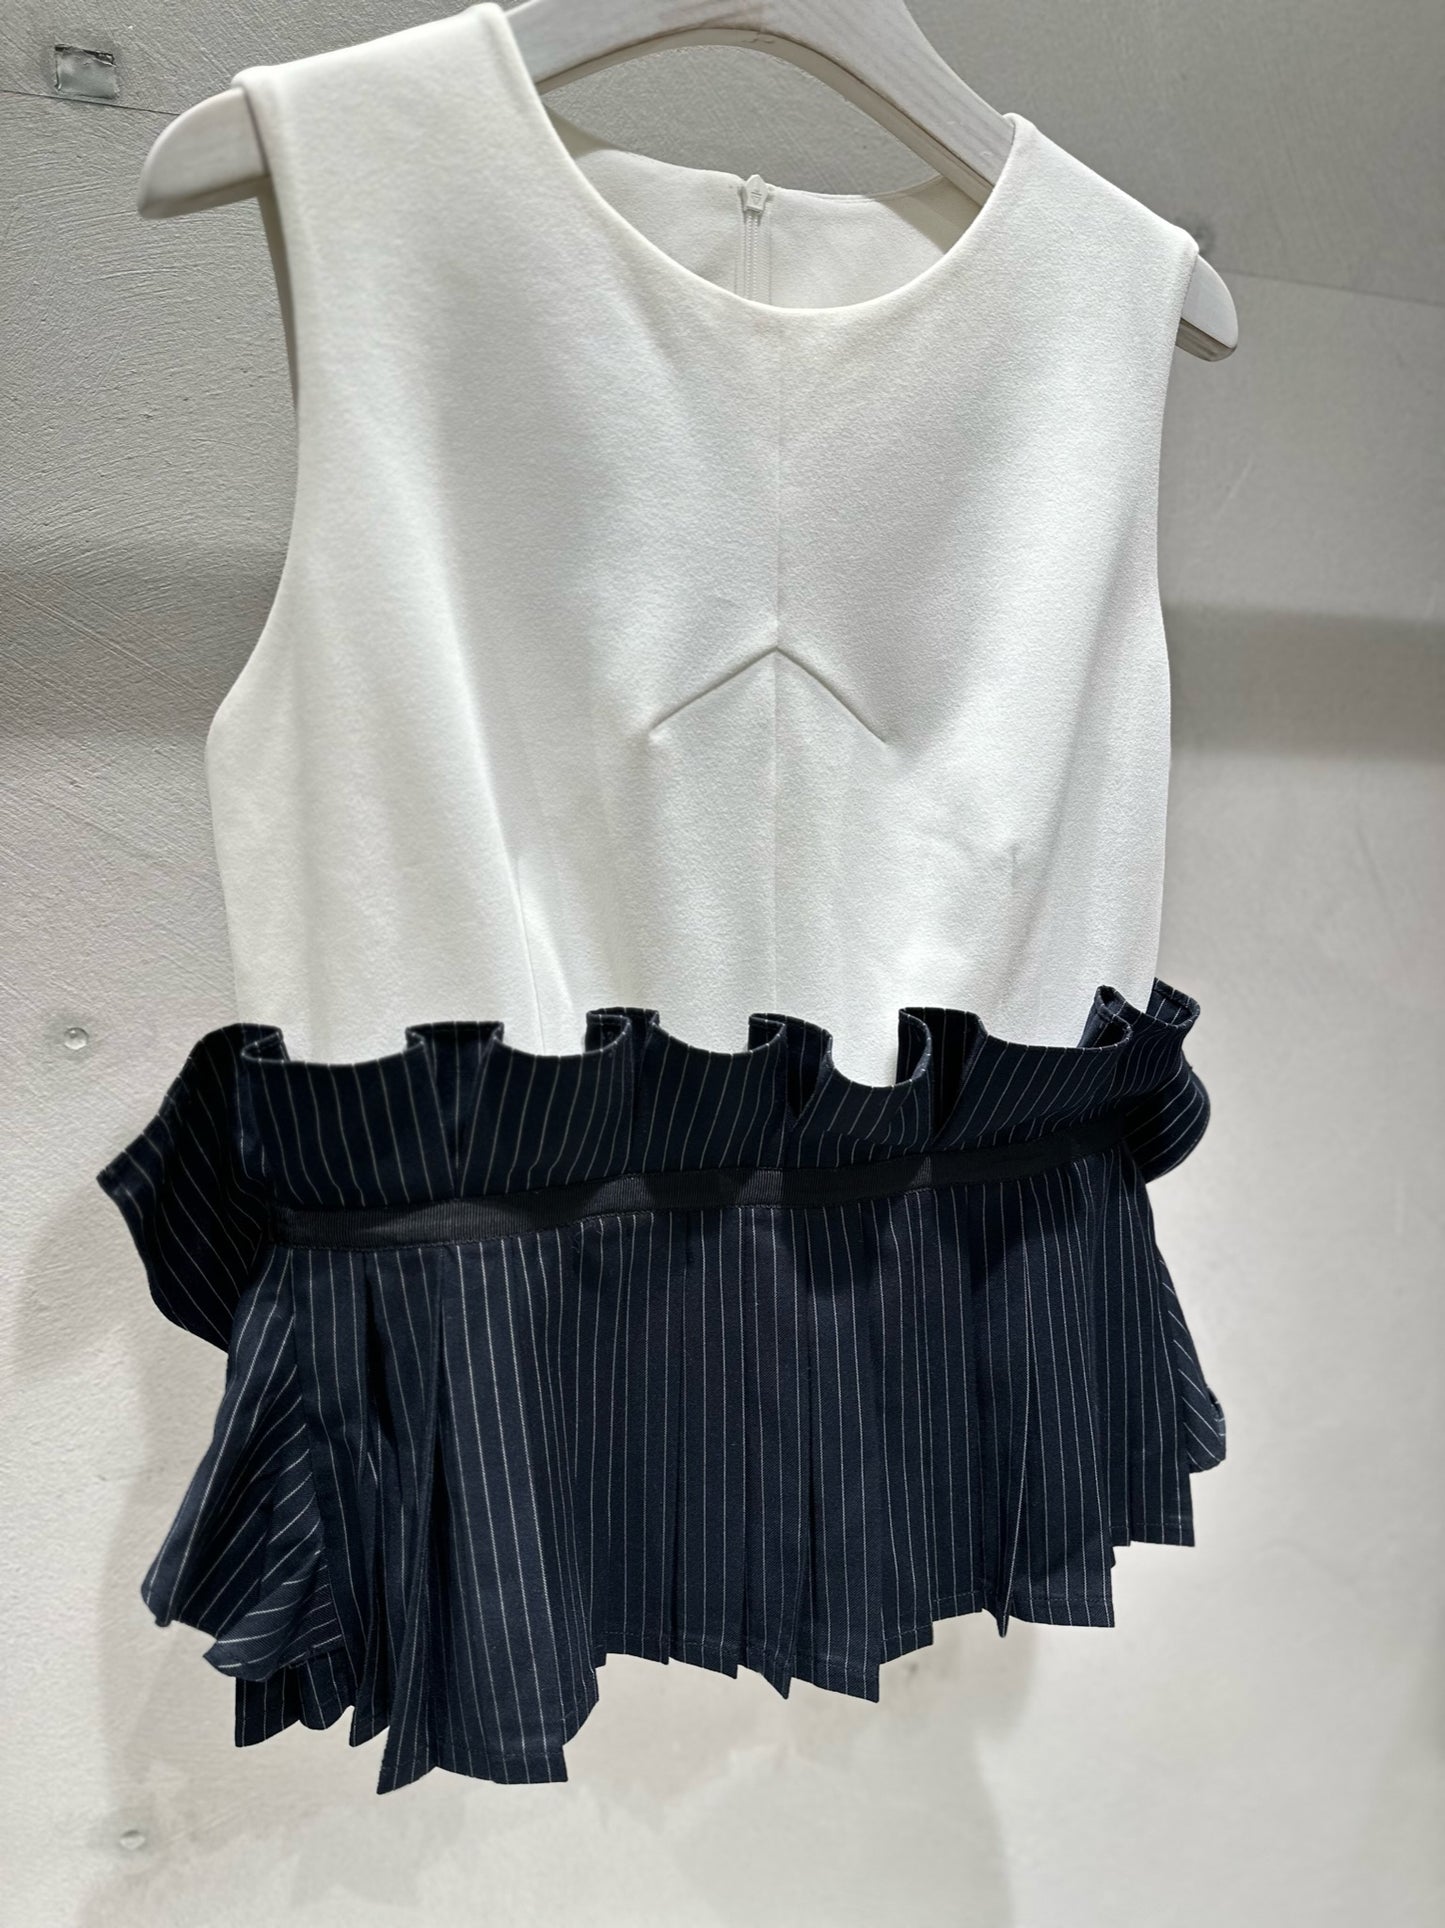 Pleated Top-Size M